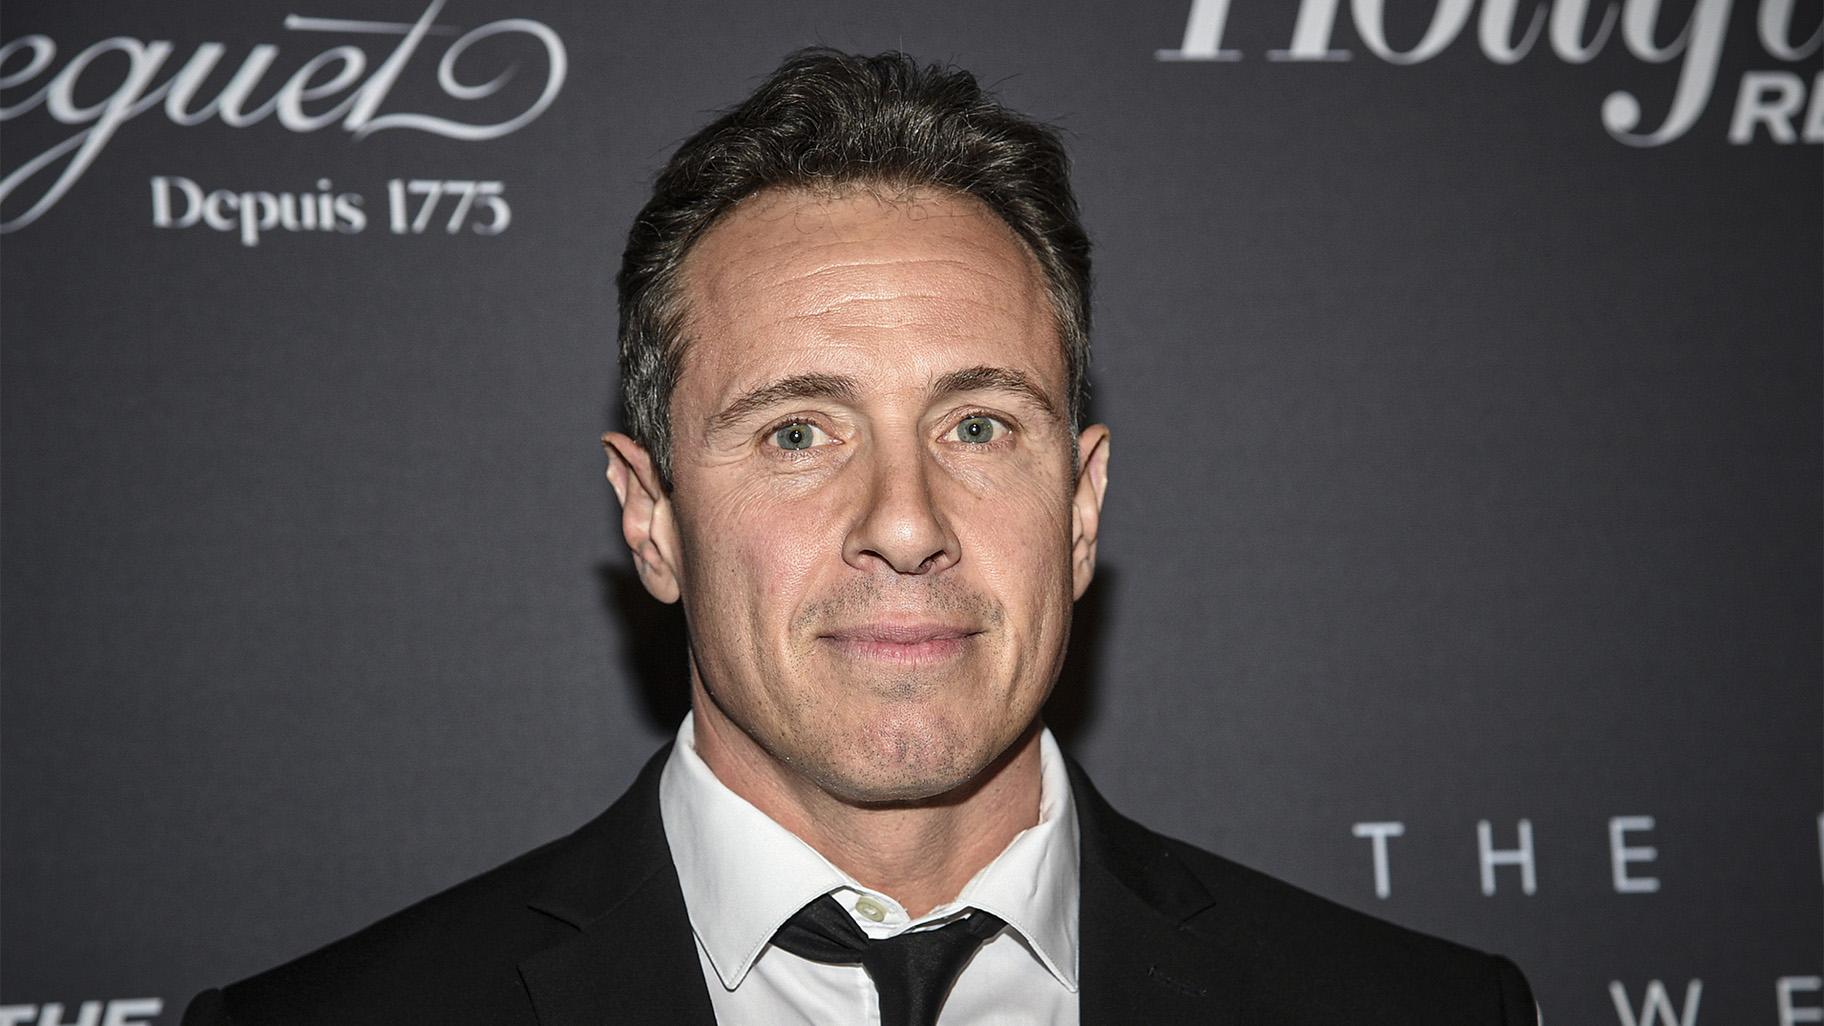 Chris Cuomo attends The Hollywood Reporter's annual Most Powerful People in Media cocktail reception on April 11, 2019, in New York.  (Photo by Evan Agostini / Invision/AP, File)